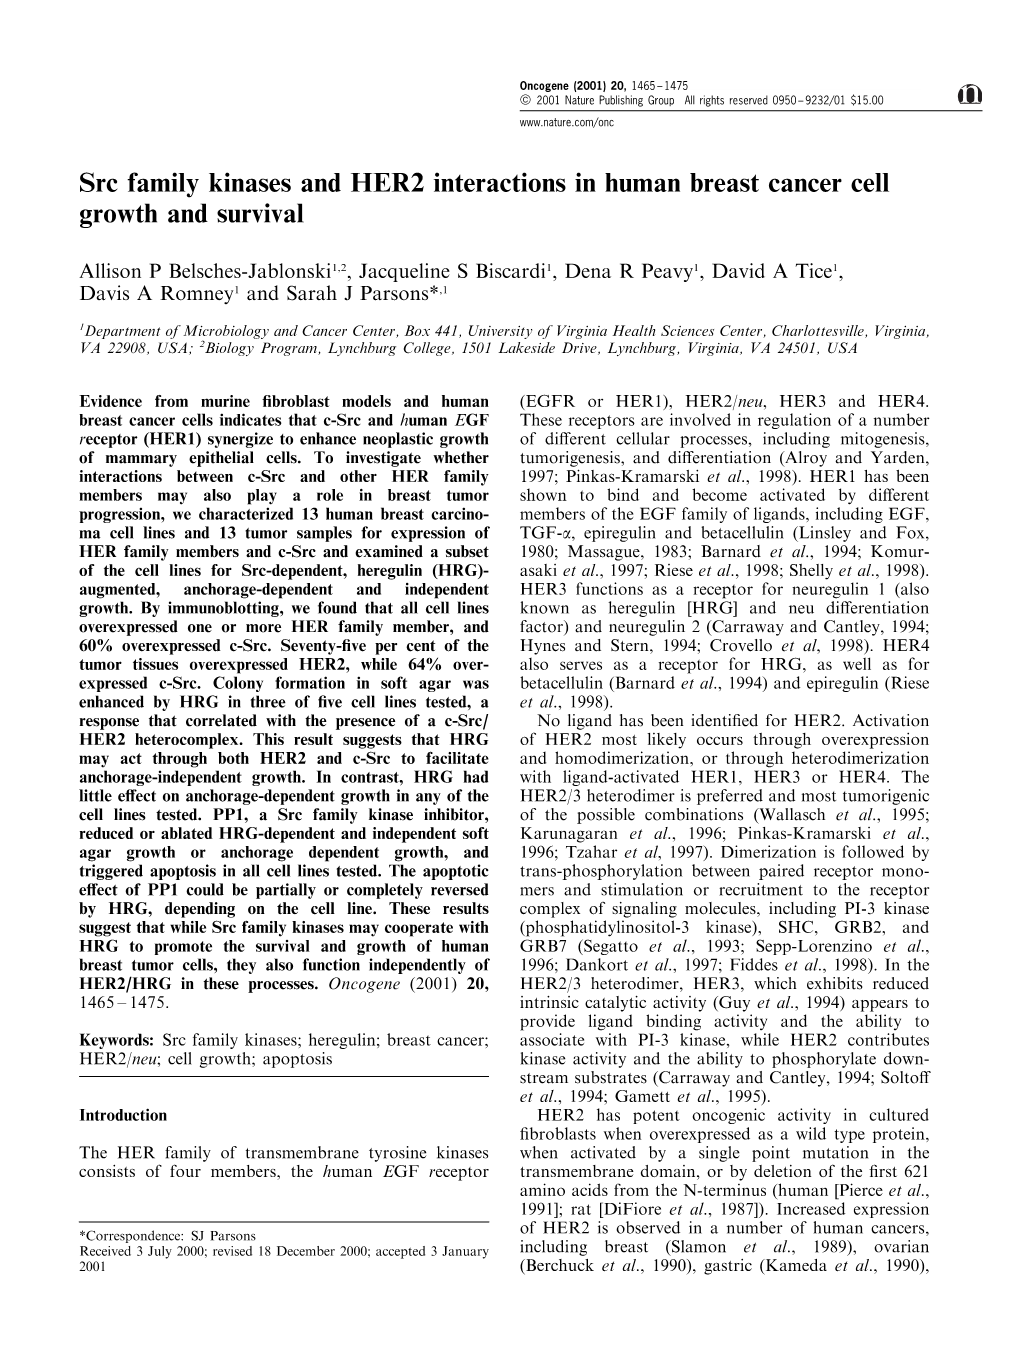 Src Family Kinases and HER2 Interactions in Human Breast Cancer Cell Growth and Survival